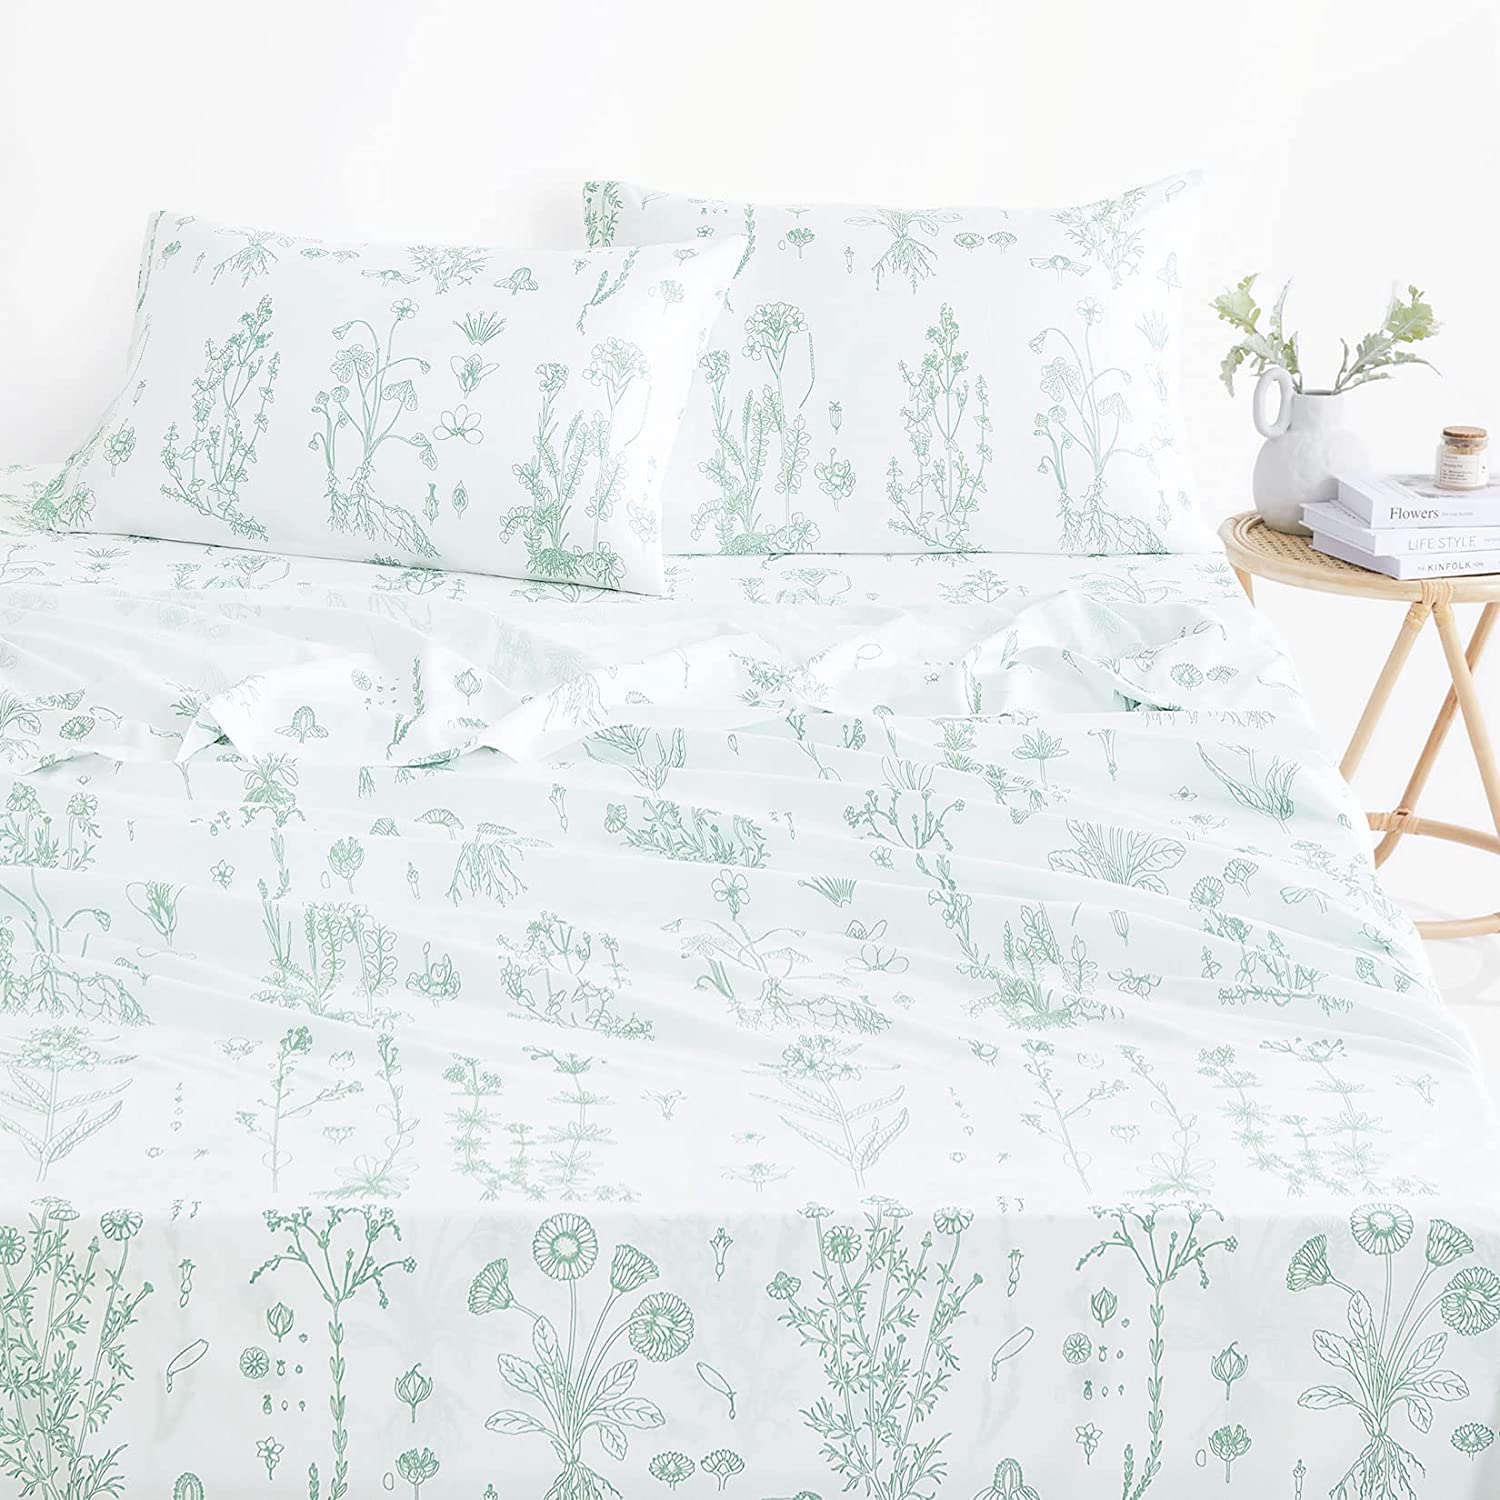  Wake In Cloud - Floral Comforter Set, Cottagecore Tiny Flowers  Leaves Botanical Plant Pattern Printed on White, Soft Microfiber Bedding  (3pcs, Twin Size) : Home & Kitchen